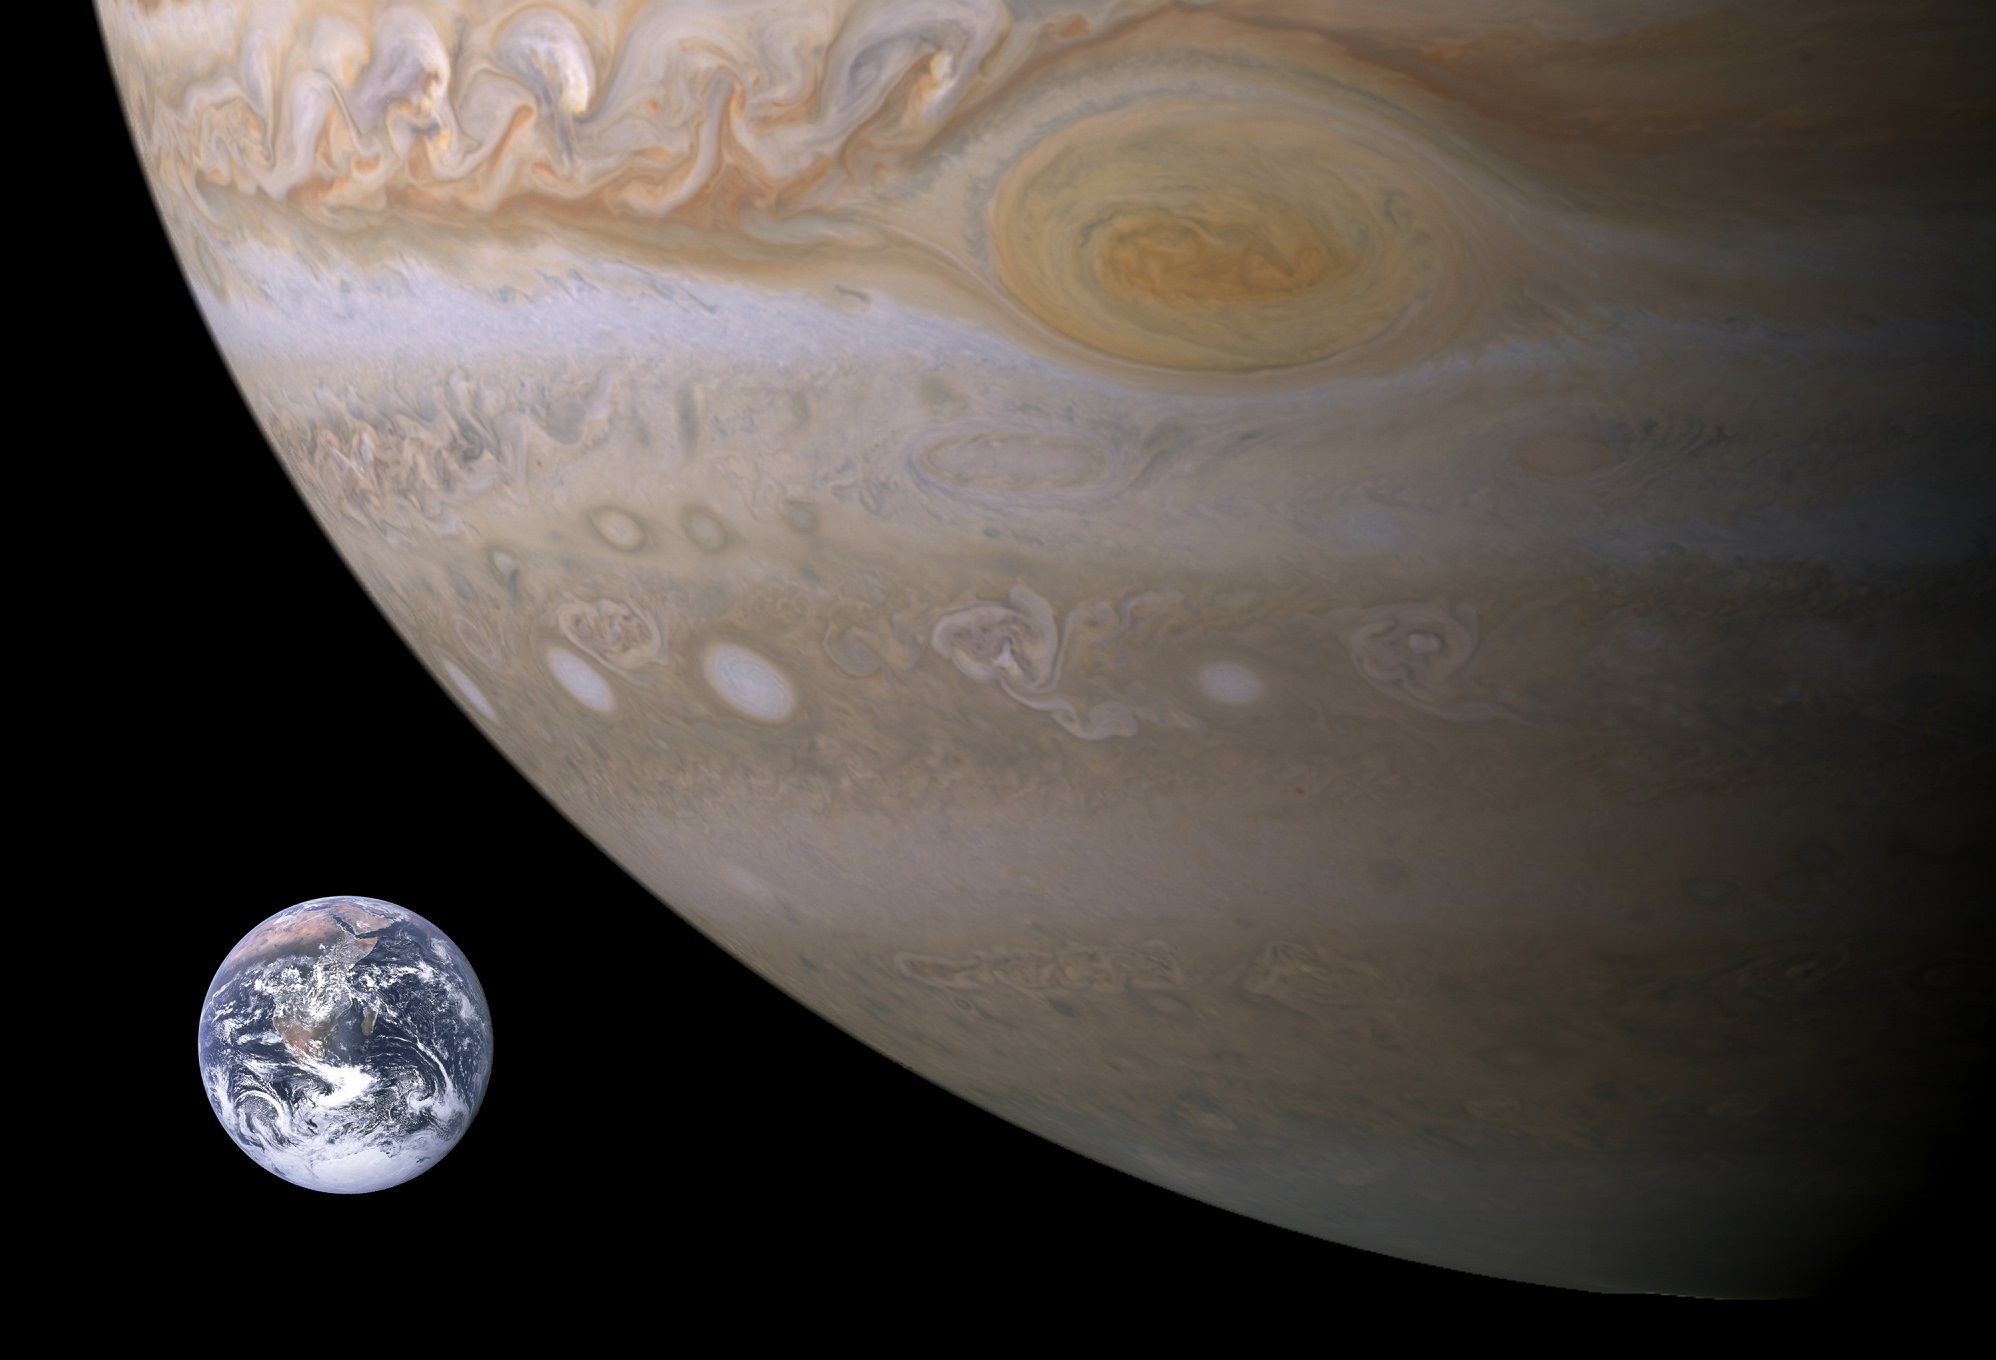 what are the different bands of clouds that appear across jupiter and how are the bands on jupiter formed